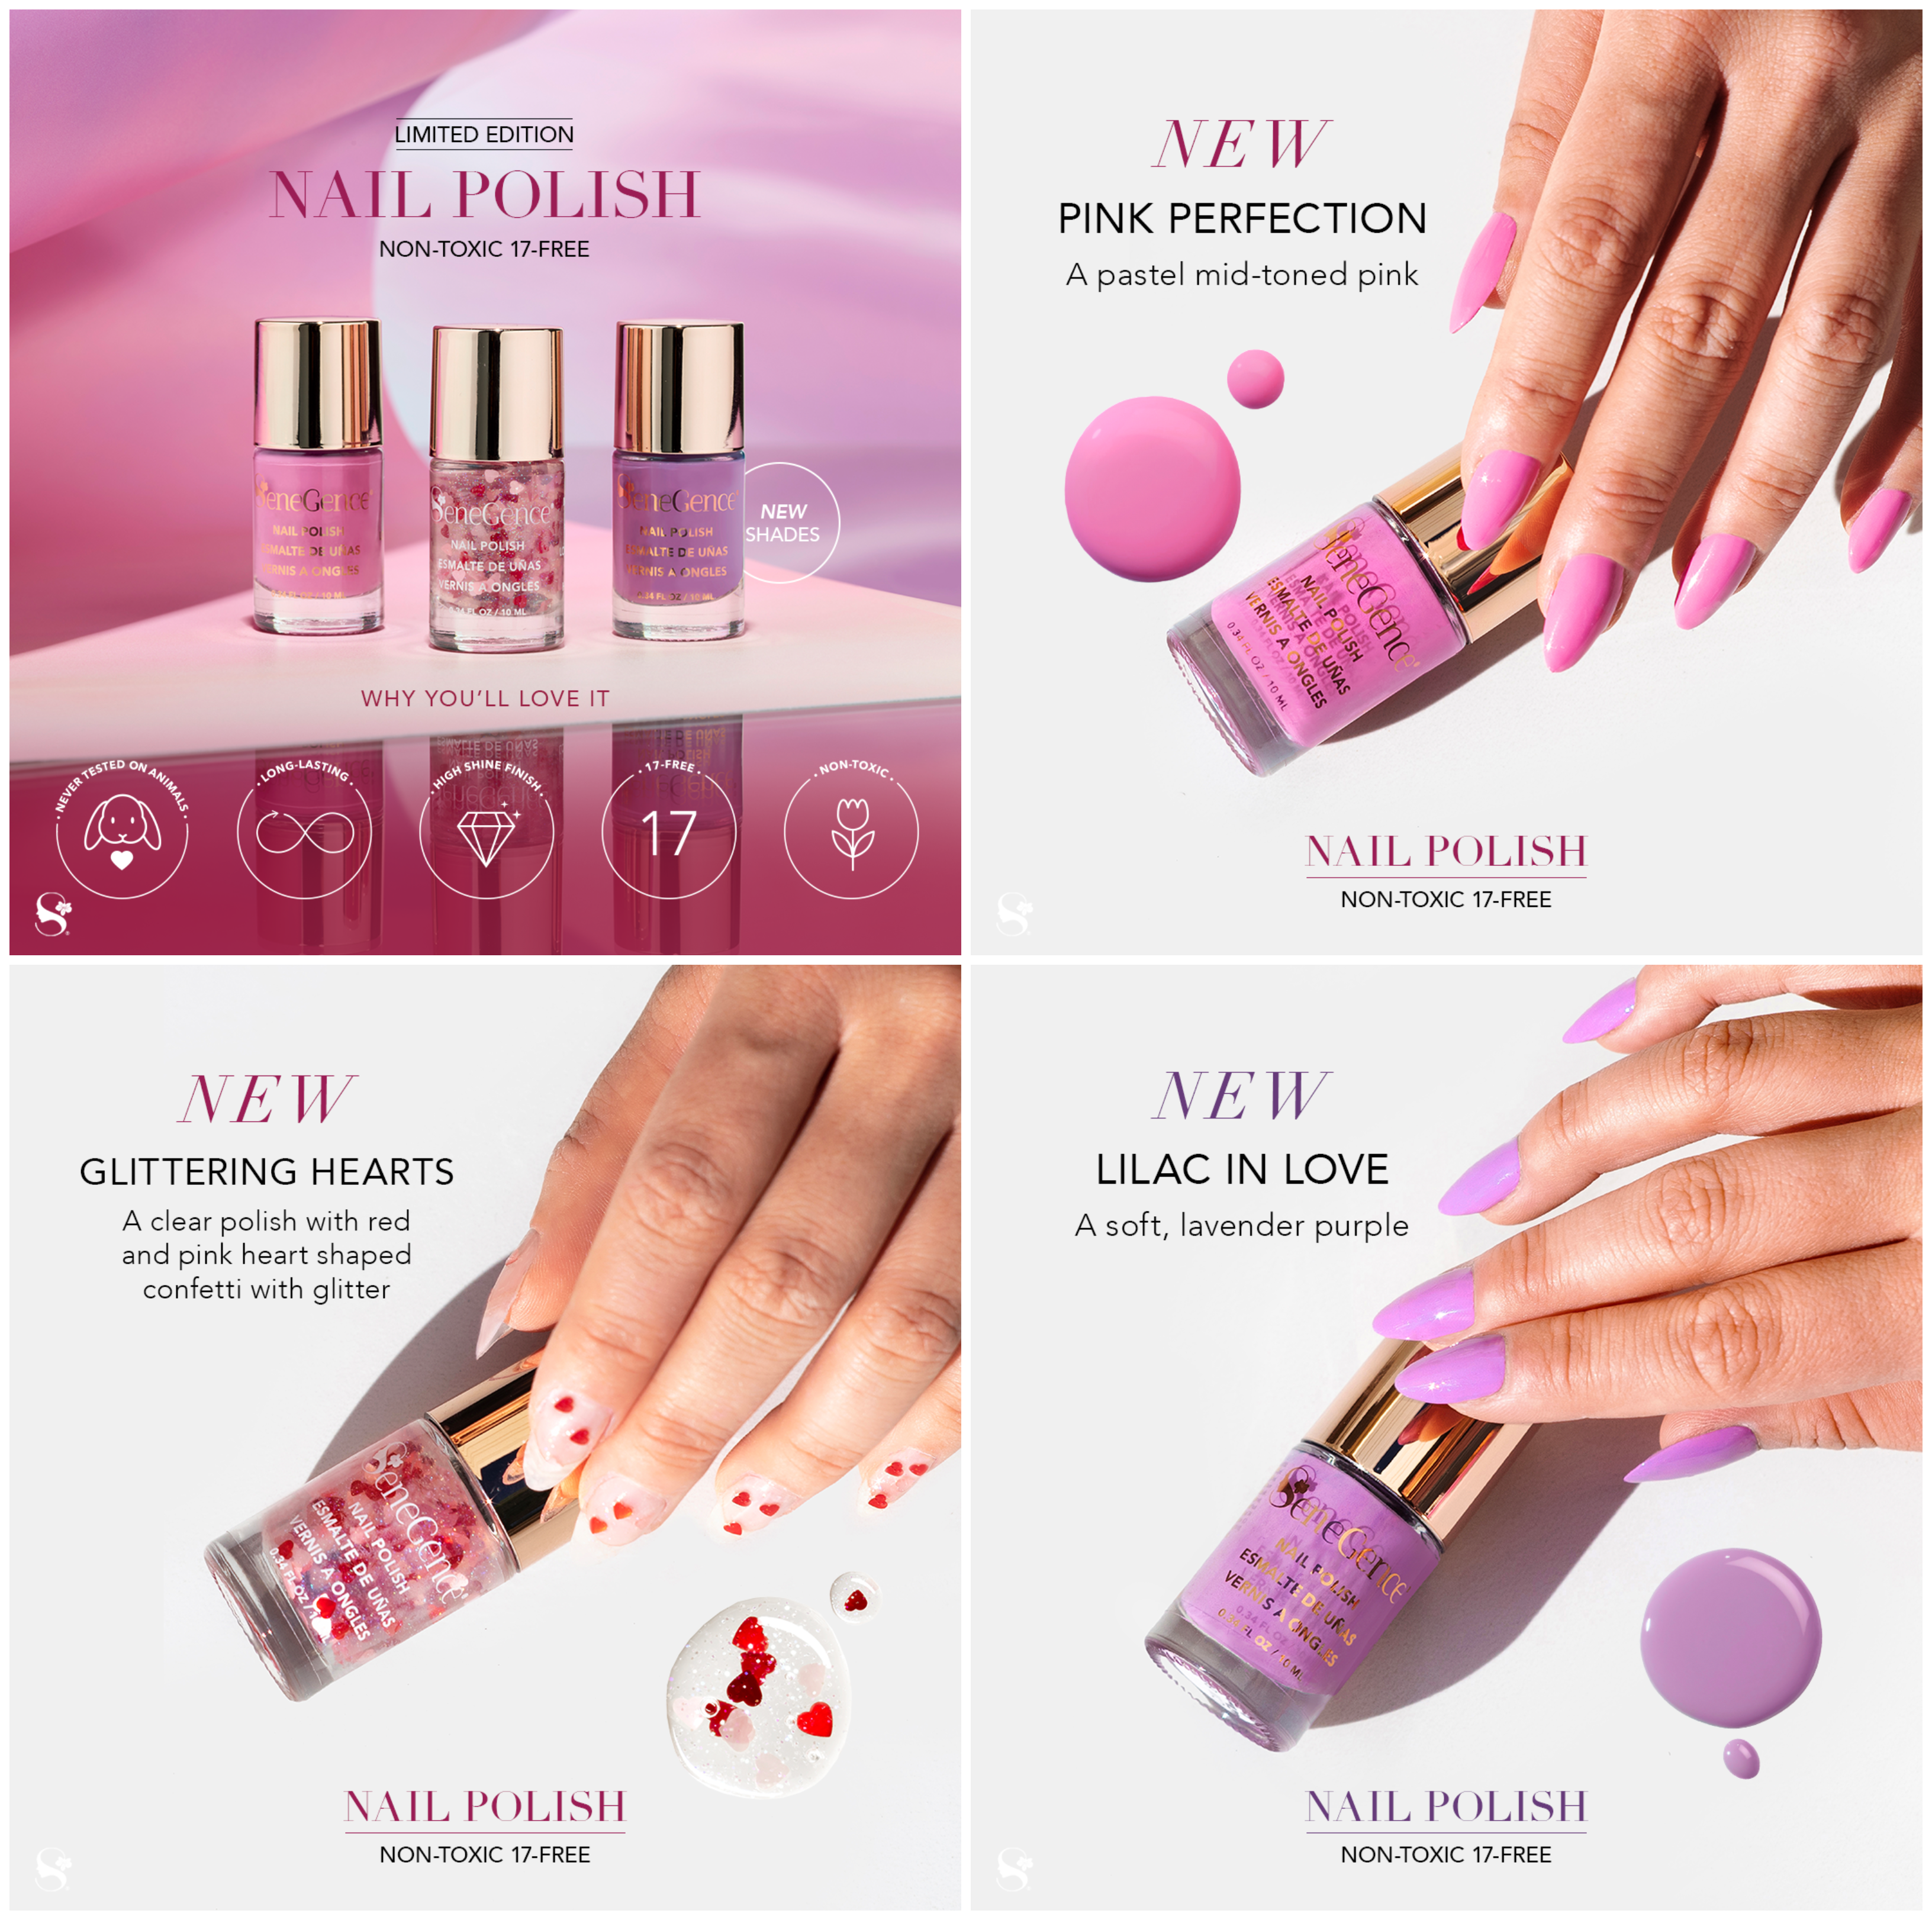 LILAC IN LOVE AND PINK PERFECTION NAIL POLISH DUO